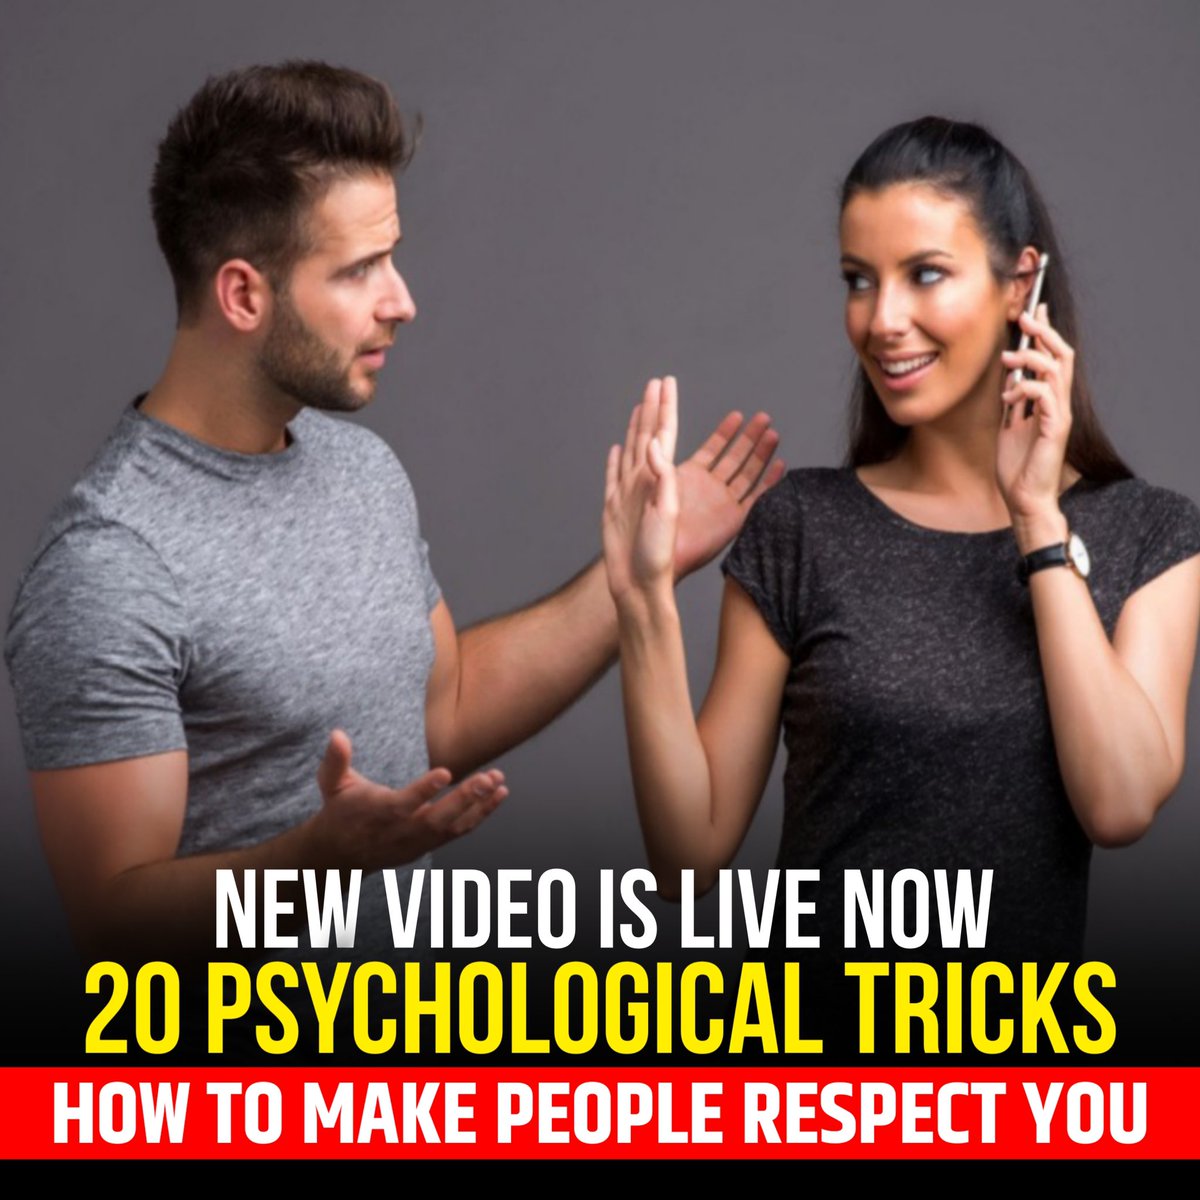 20 Psychological Tricks: How To Make People Respect You Instantly

Link: youtu.be/fjd5nl3tS4o

#psychology #psychologicaltricks #fact #psychologicaltips #psychologyfacts #truefacts #factsaboutpeople #facts #interestingfact #interestingfacts #unusualfacts #instafacts